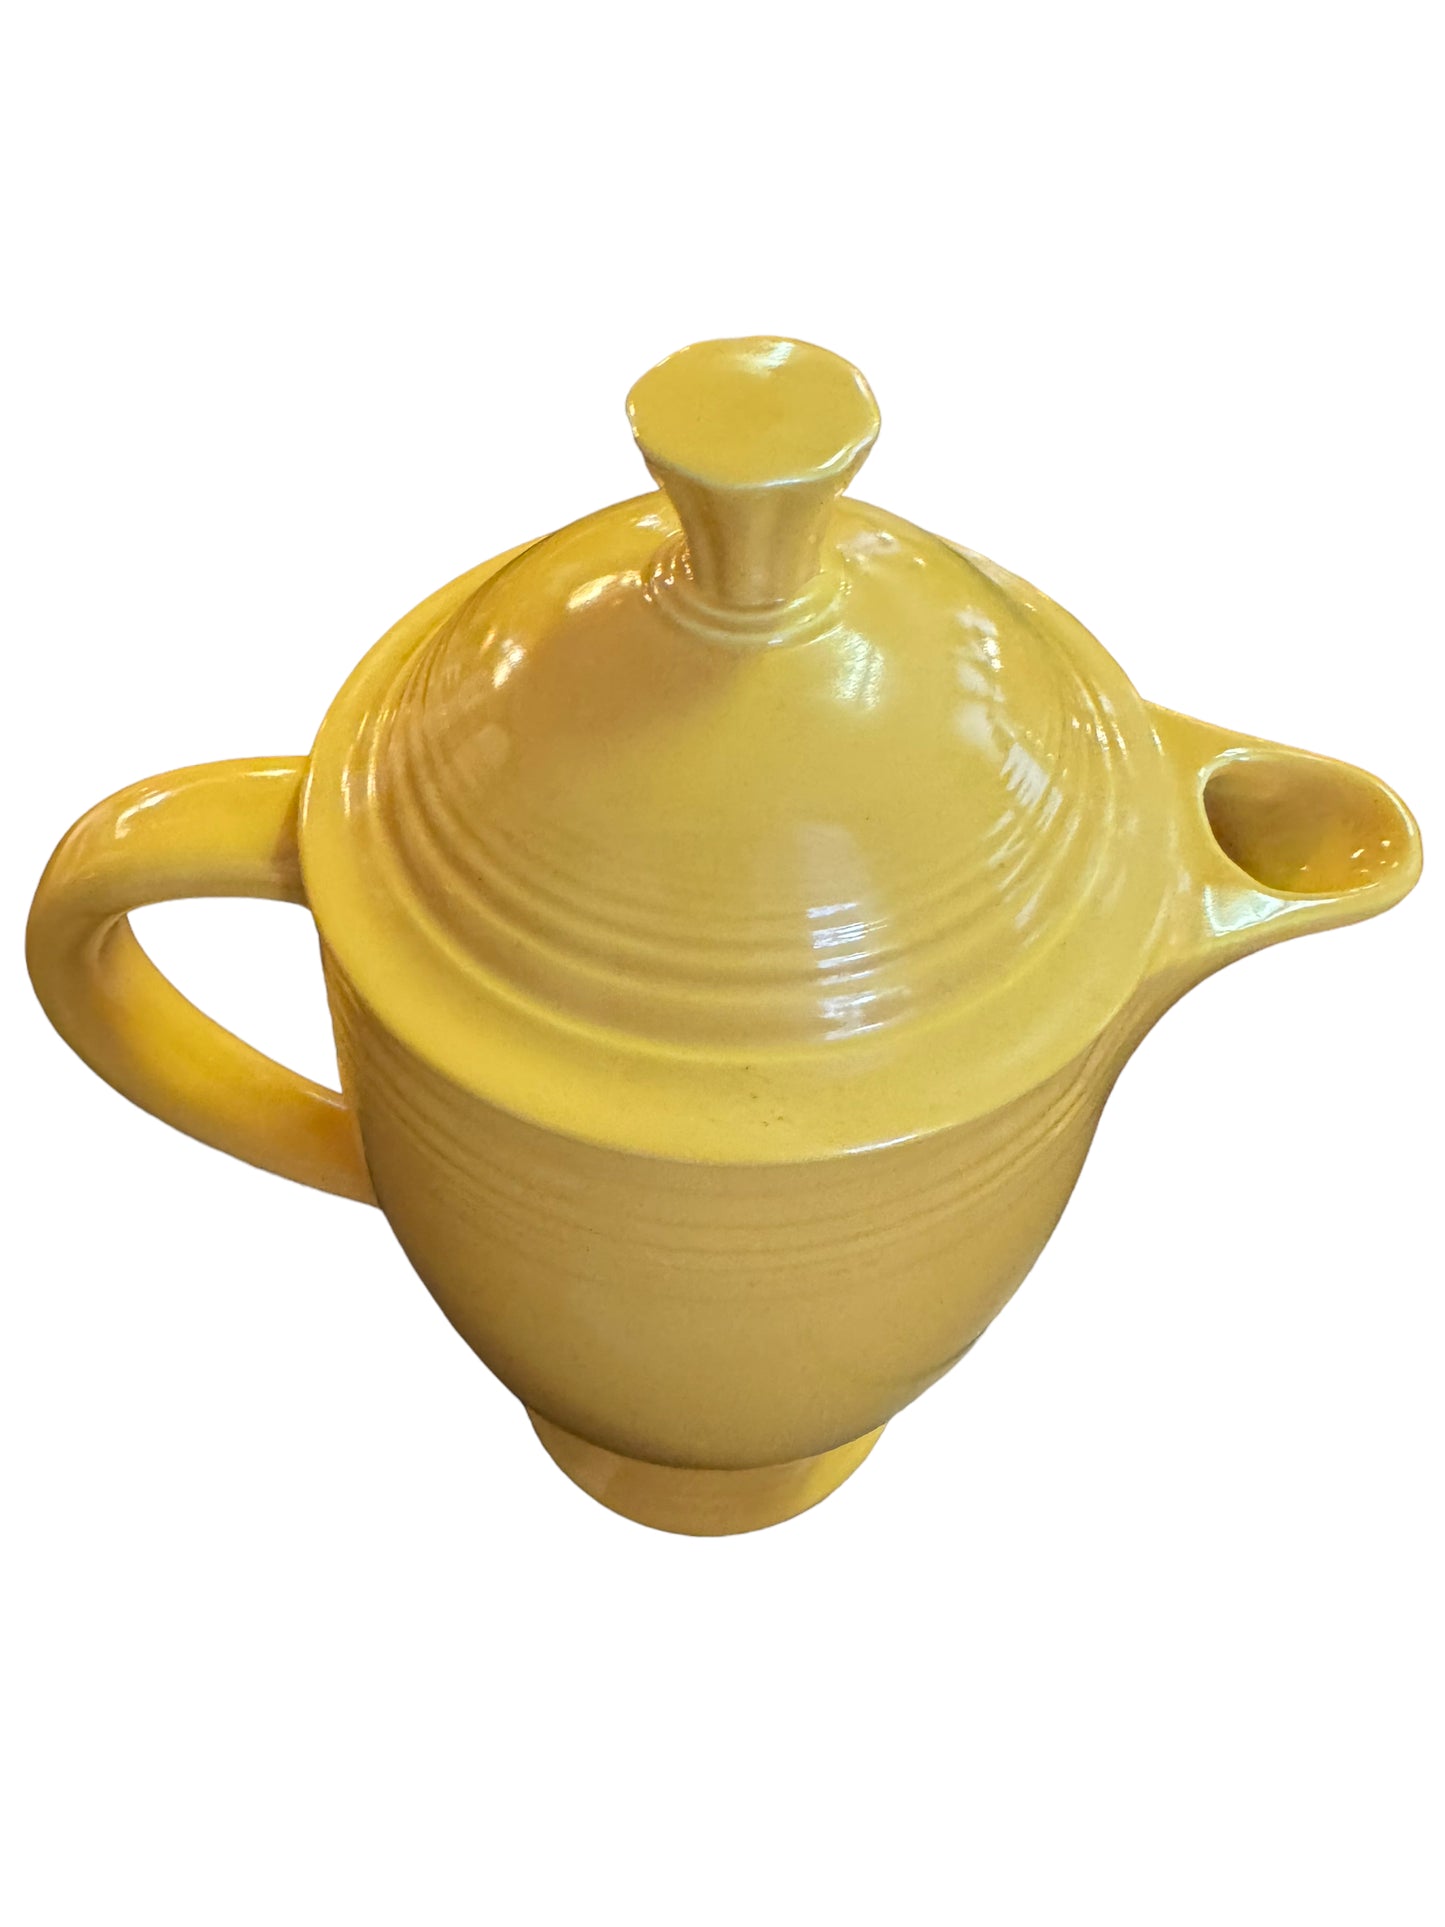 Fiesta Large Vintage Coffee Pot in Yellow